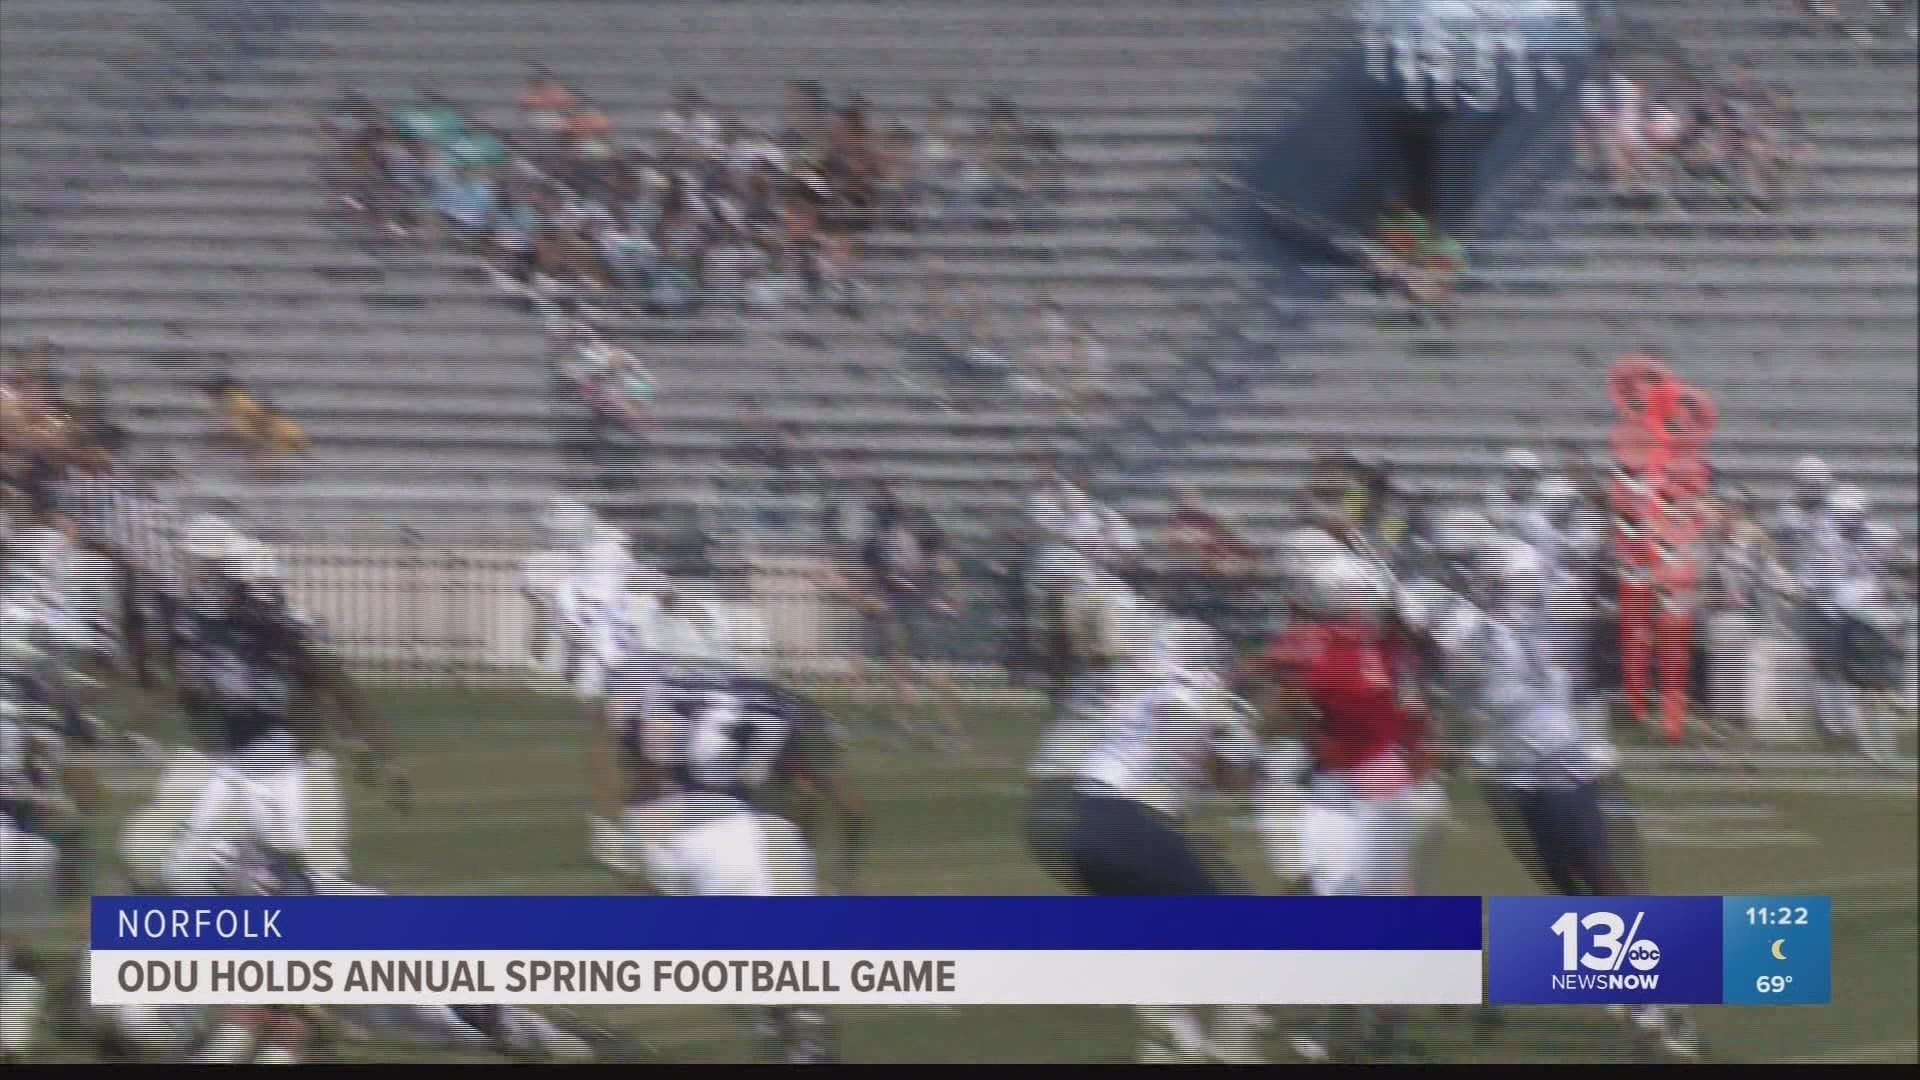 Drayton Arnold passed for 2 touchdown to go with 195 yards passing as the Blue won over the White 26-21 at the annual ODU Football Spring Game on Saturday.